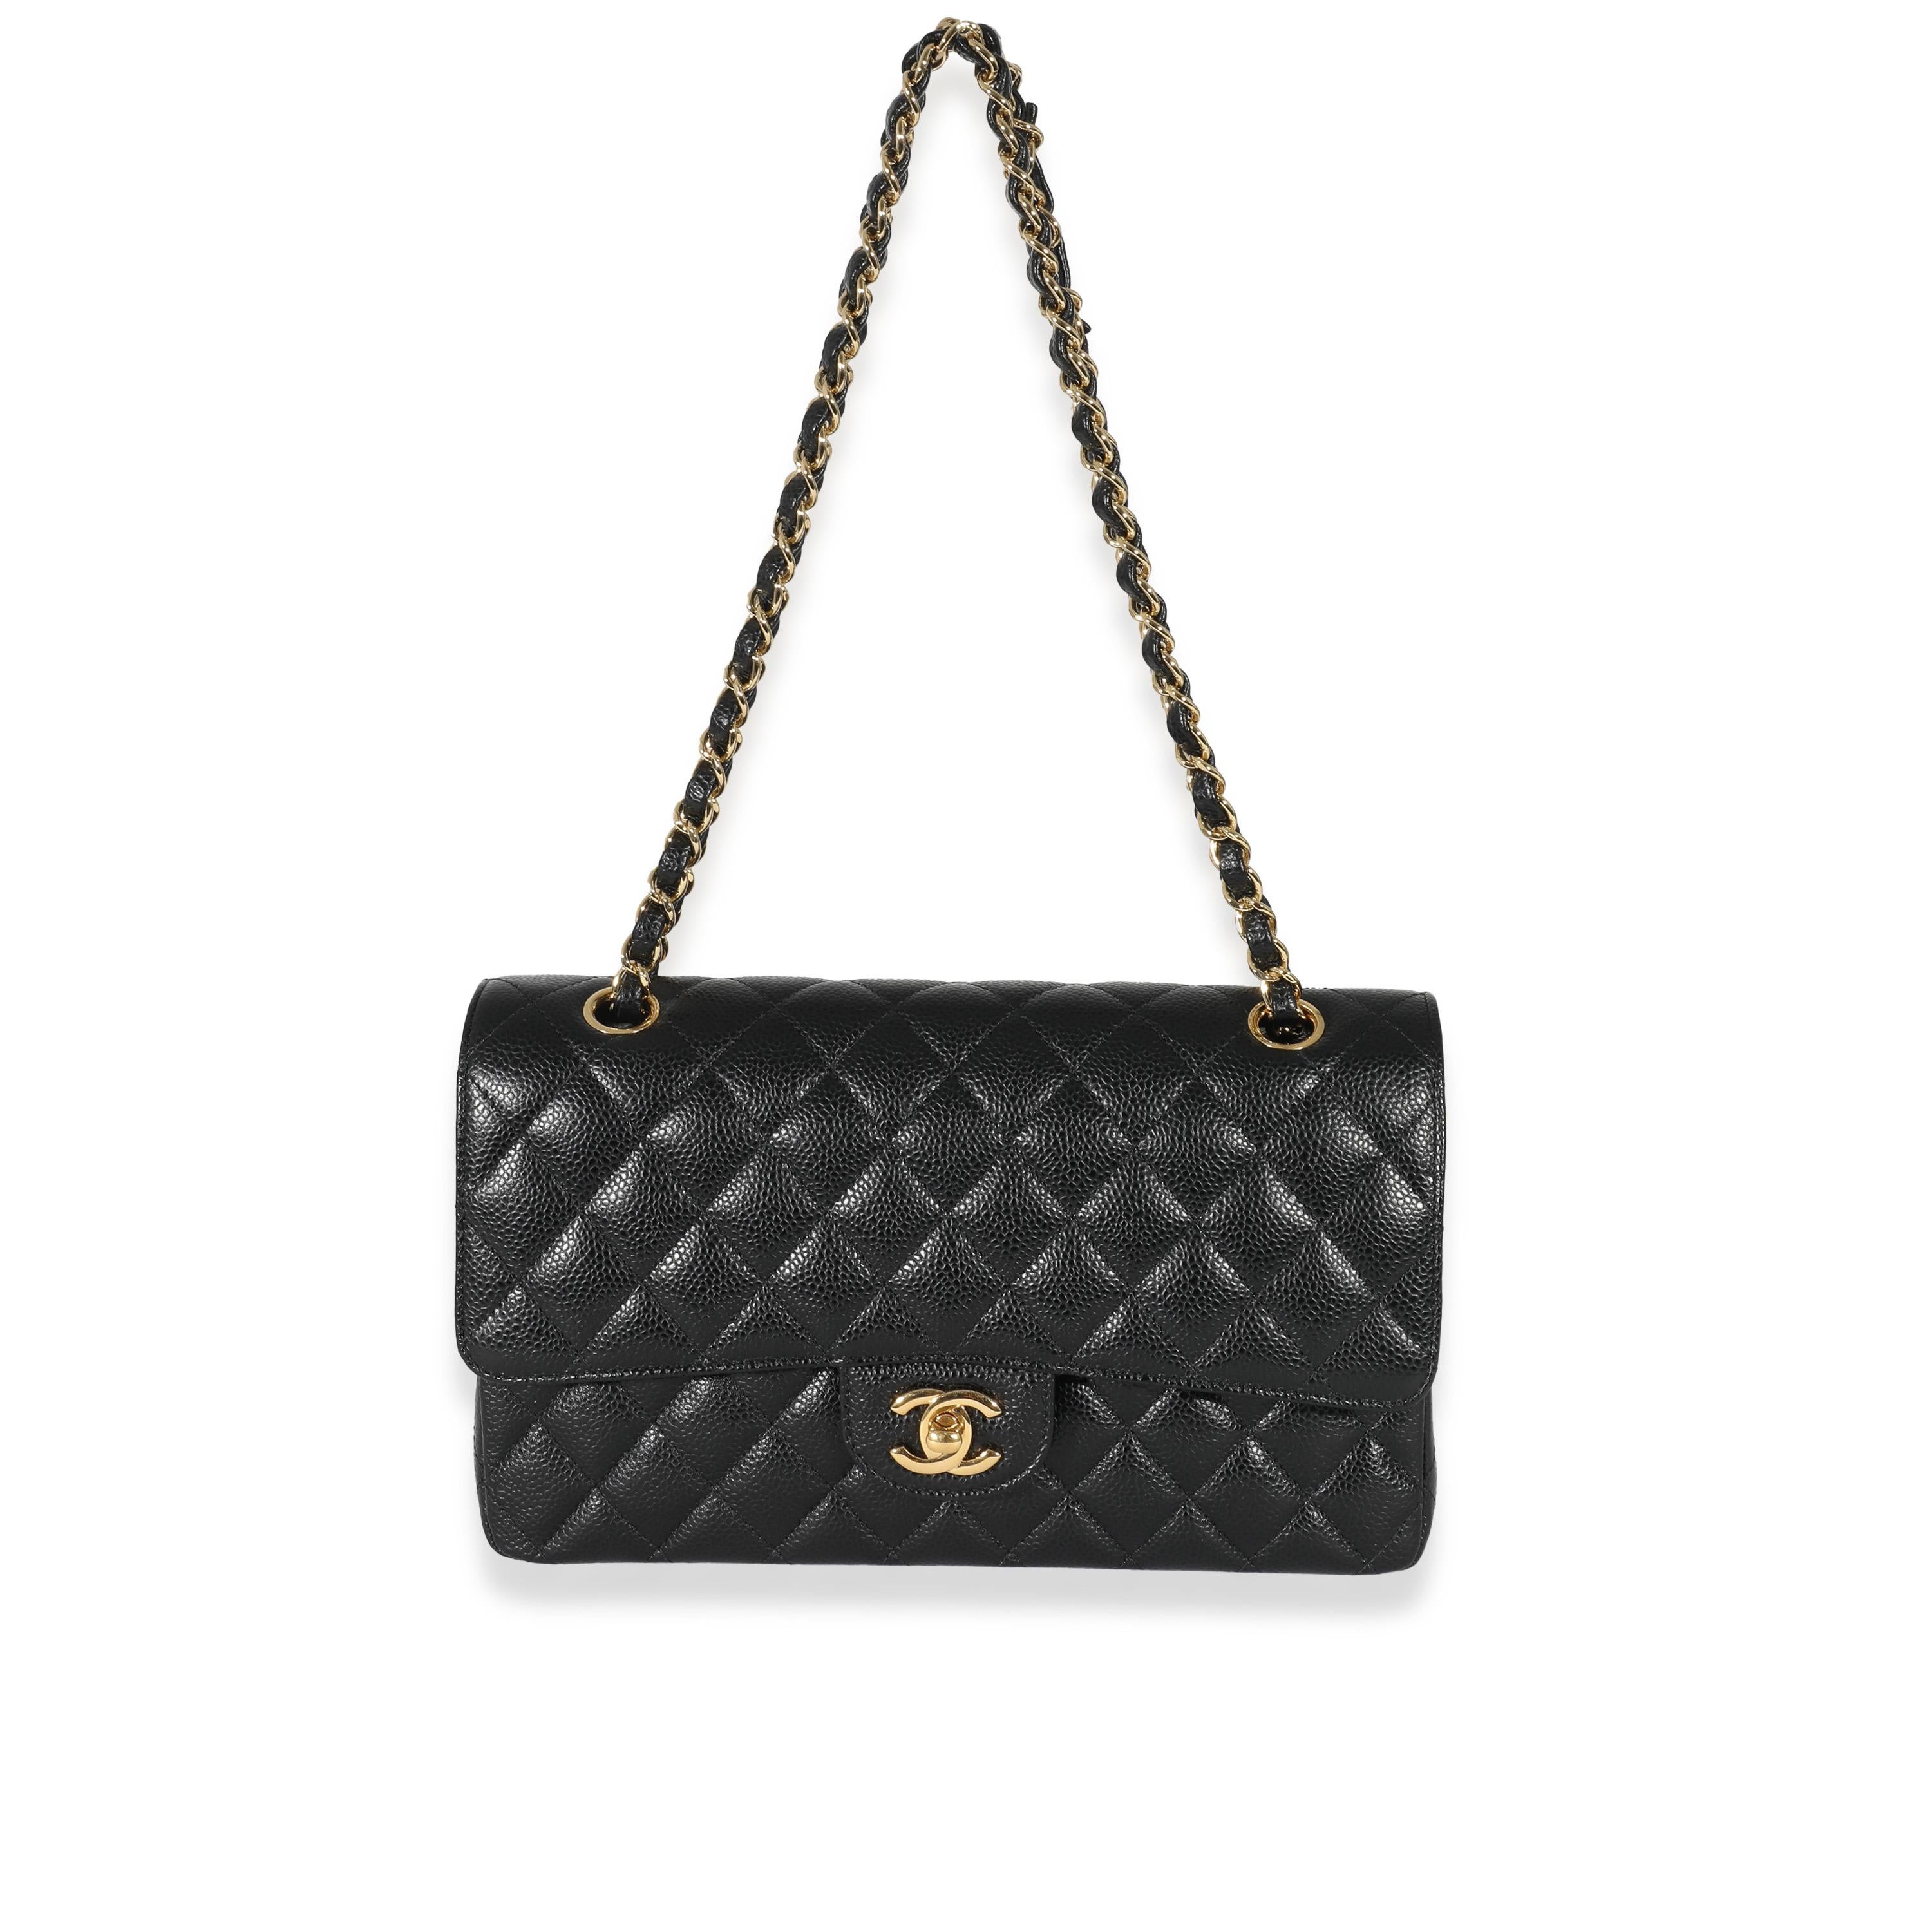 Listing Title: Chanel Black Caviar Medium Classic Double Flap Bag
SKU: 132549
Condition: Pre-owned 
Handbag Condition: Excellent
Condition Comments: Item is in excellent condition and displays light signs of wear. Light creasing along leather.